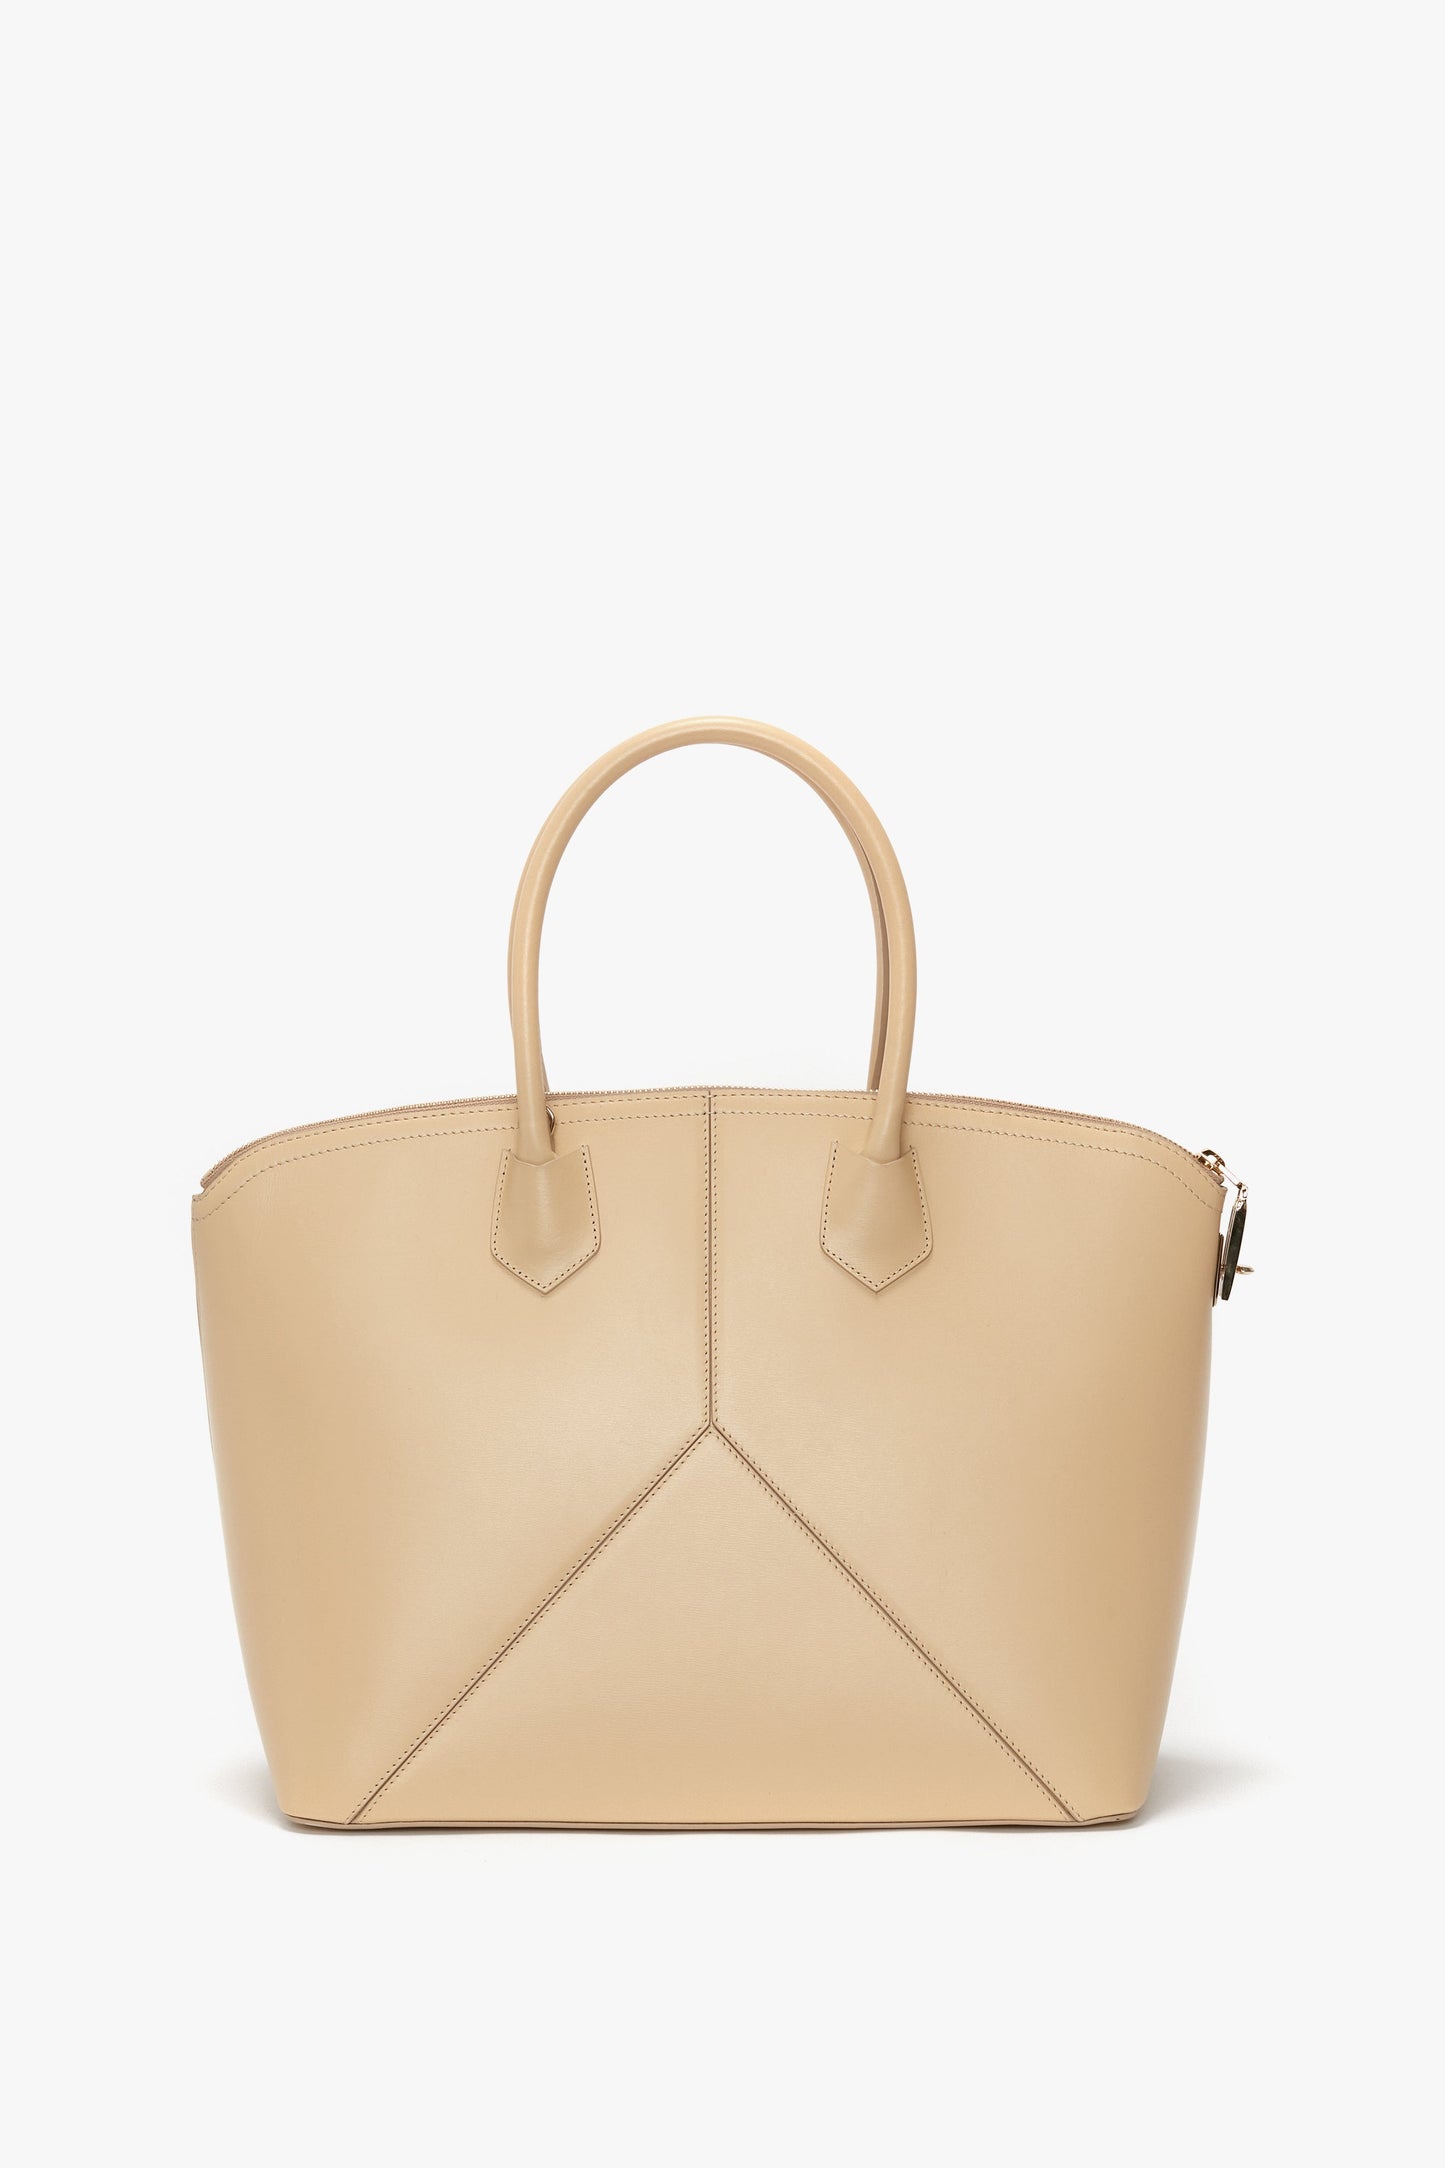 The Victoria Beckham Victoria Bag In Sesame Leather: a beige leather handbag featuring two short straps and intricate geometric leather panels on the front.